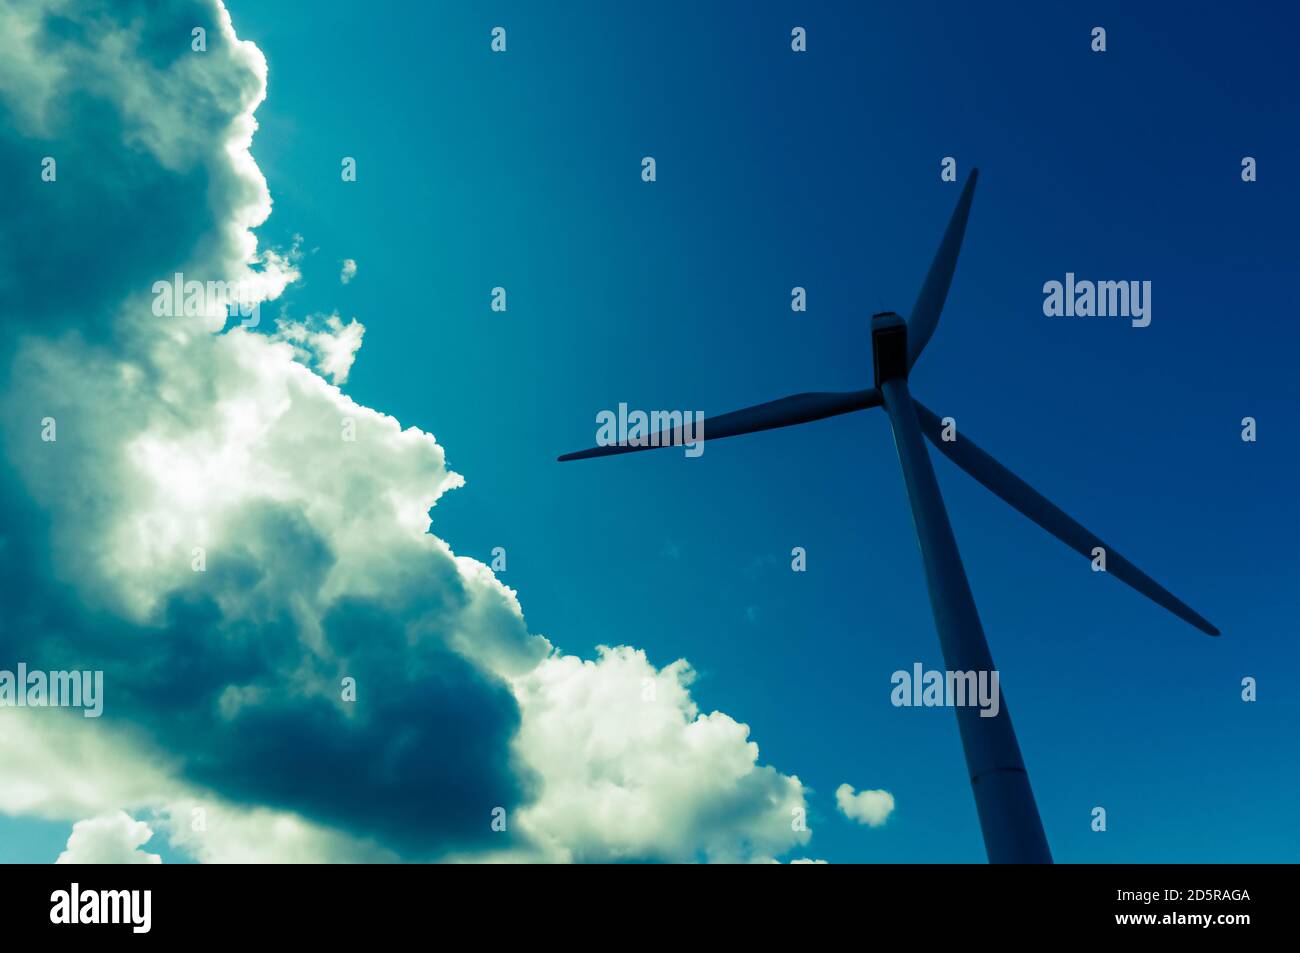 Silhouette of a windmill with clouds in the background Stock Photo